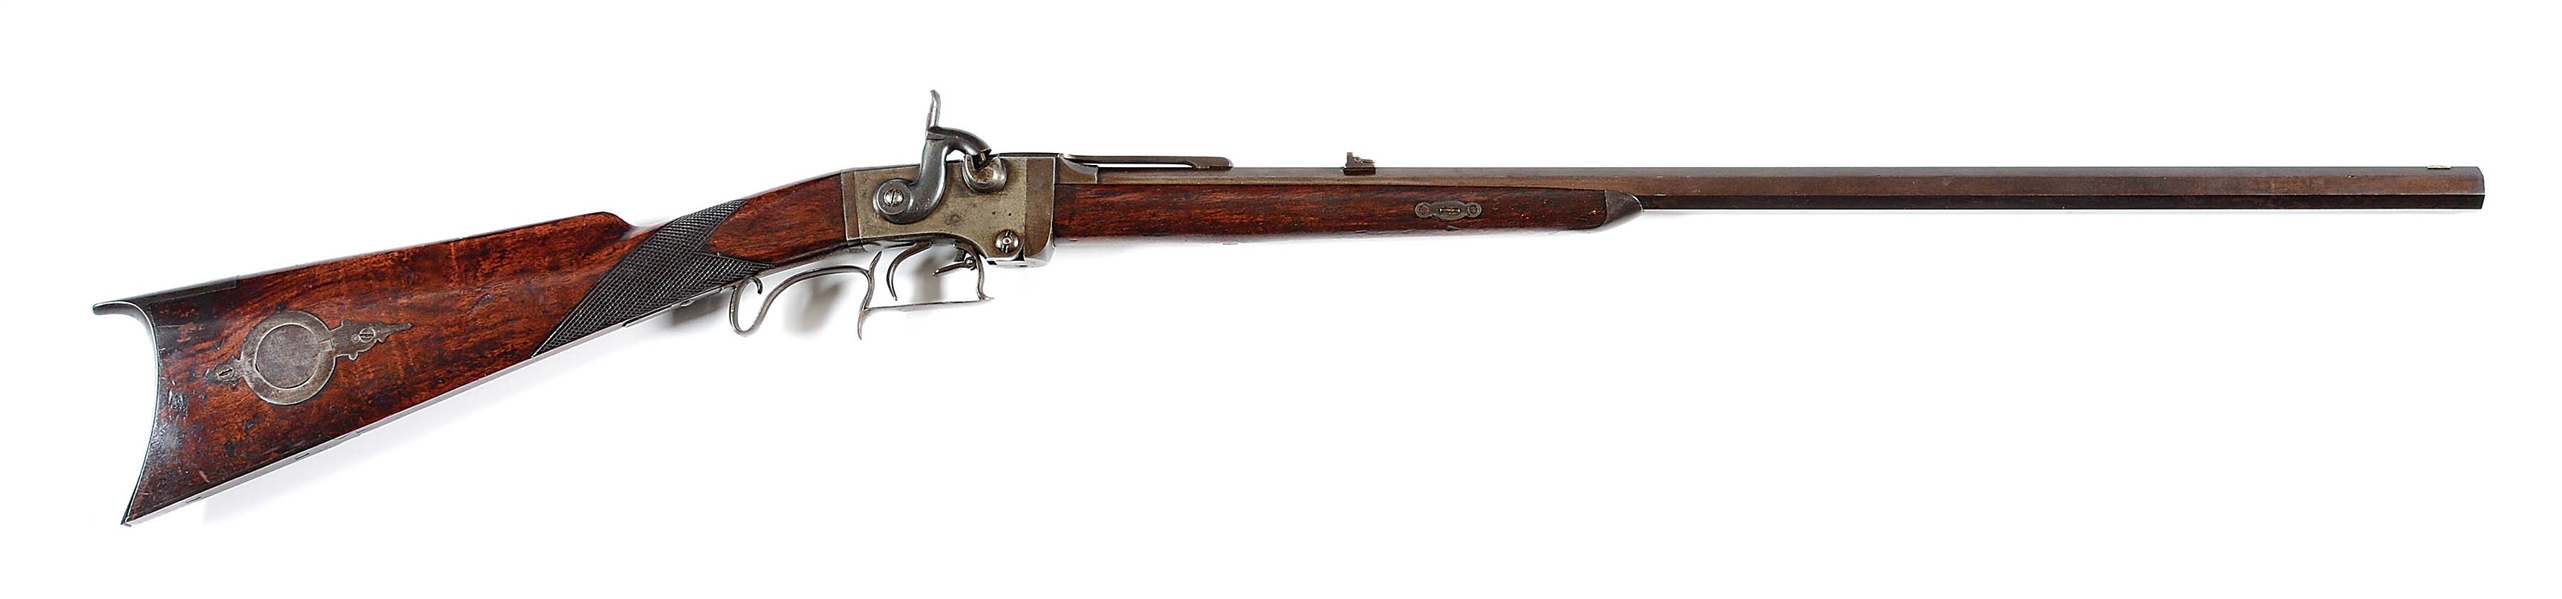 (A) SMITH PERCUSSION SPORTING RIFLE.